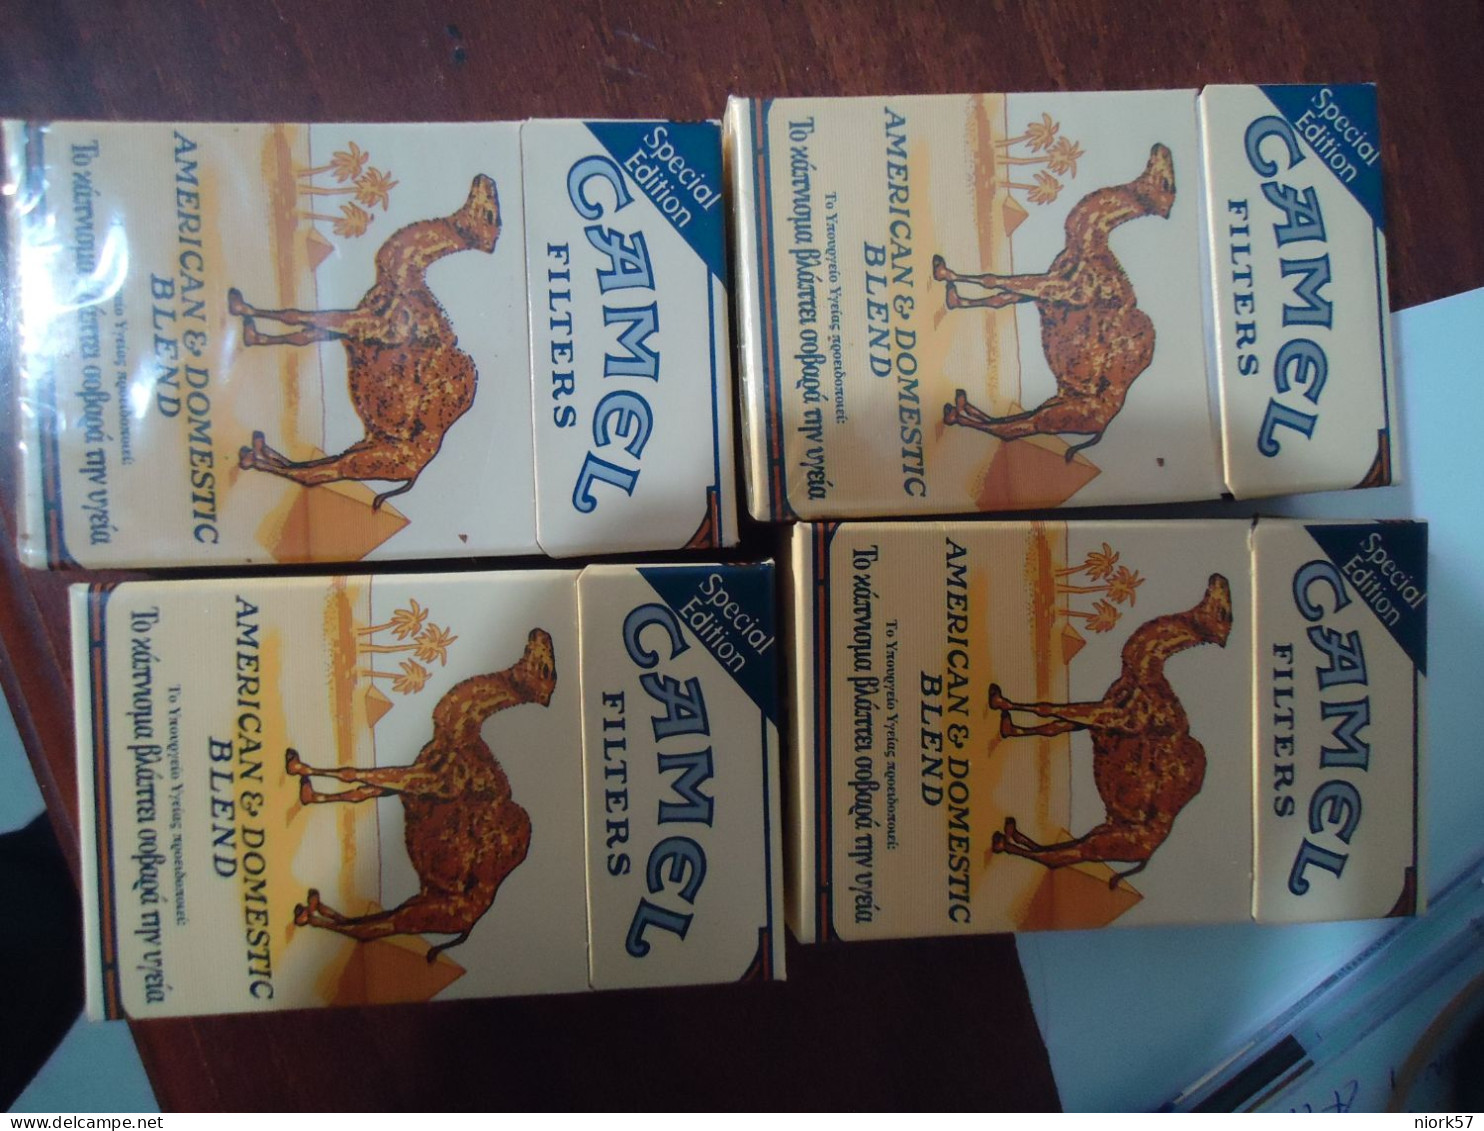 GREECE USED EMPTY 4 CIGARETTES BOXES  CAMEL SPECIAL EDITION - Boites à Tabac Vides